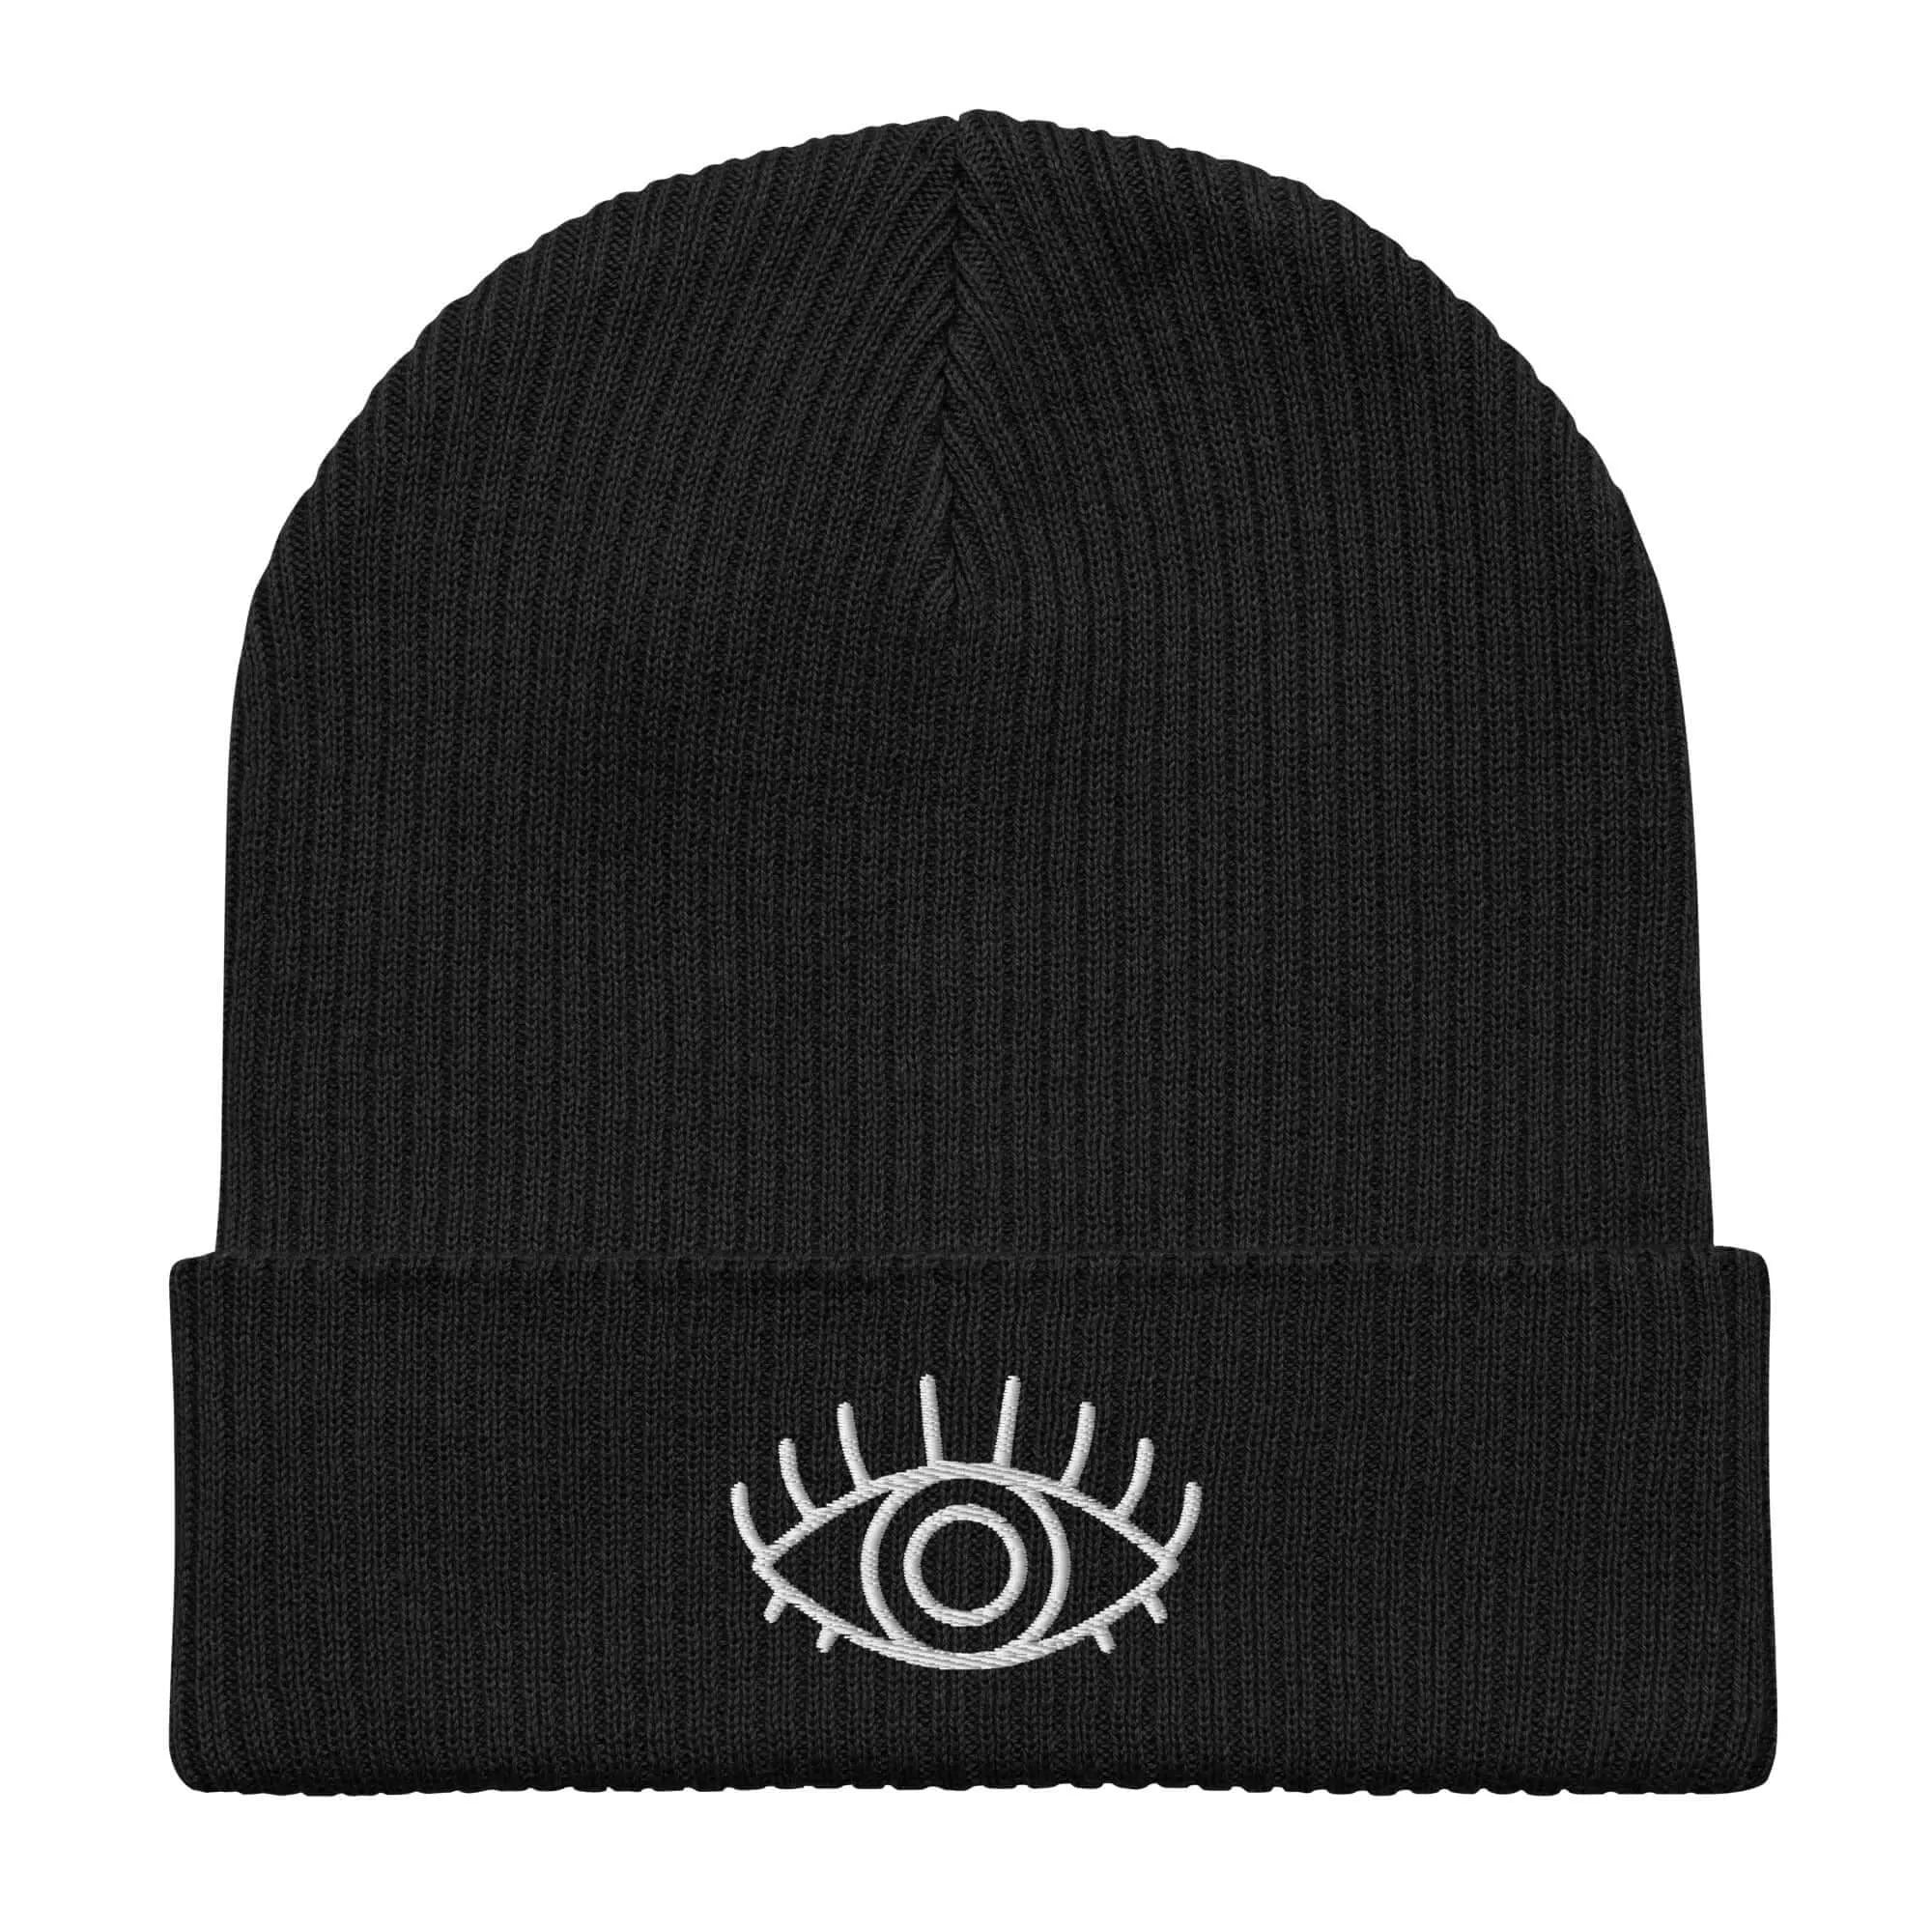 Organic Third Eye metaphysical Ribbed witchy magical Beanie Winter Hat